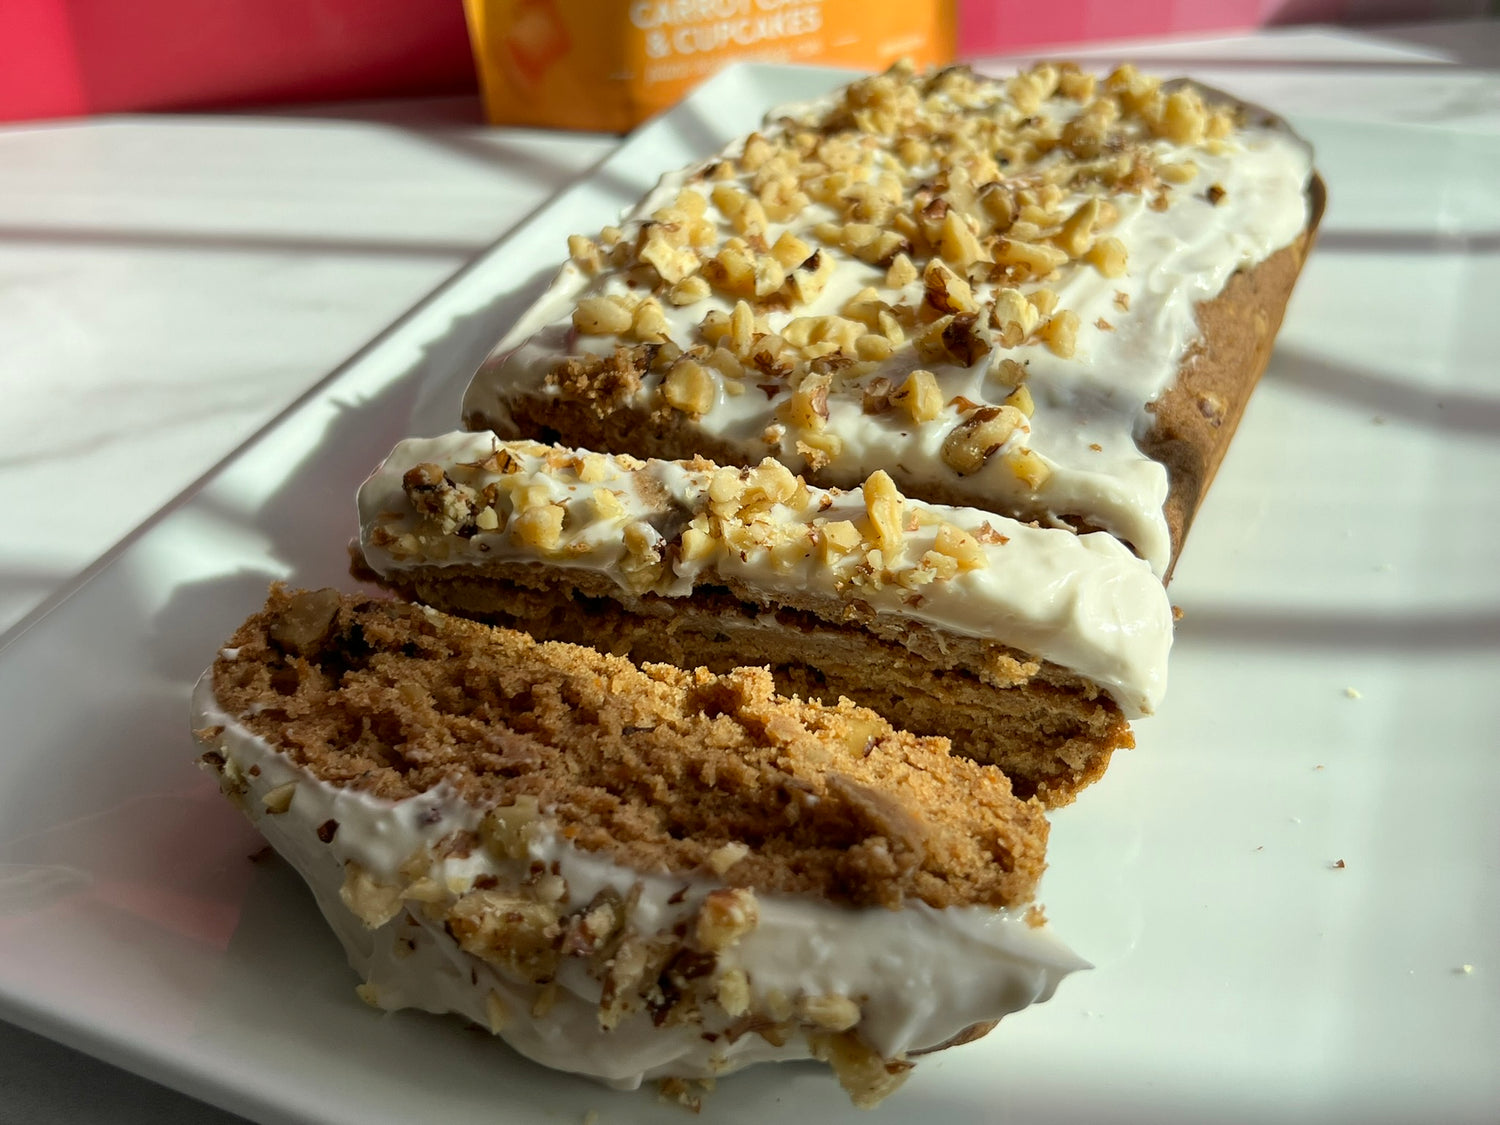 Easy Gluten-Free, Vegan Carrot Cake with Cream Cheese Frosting